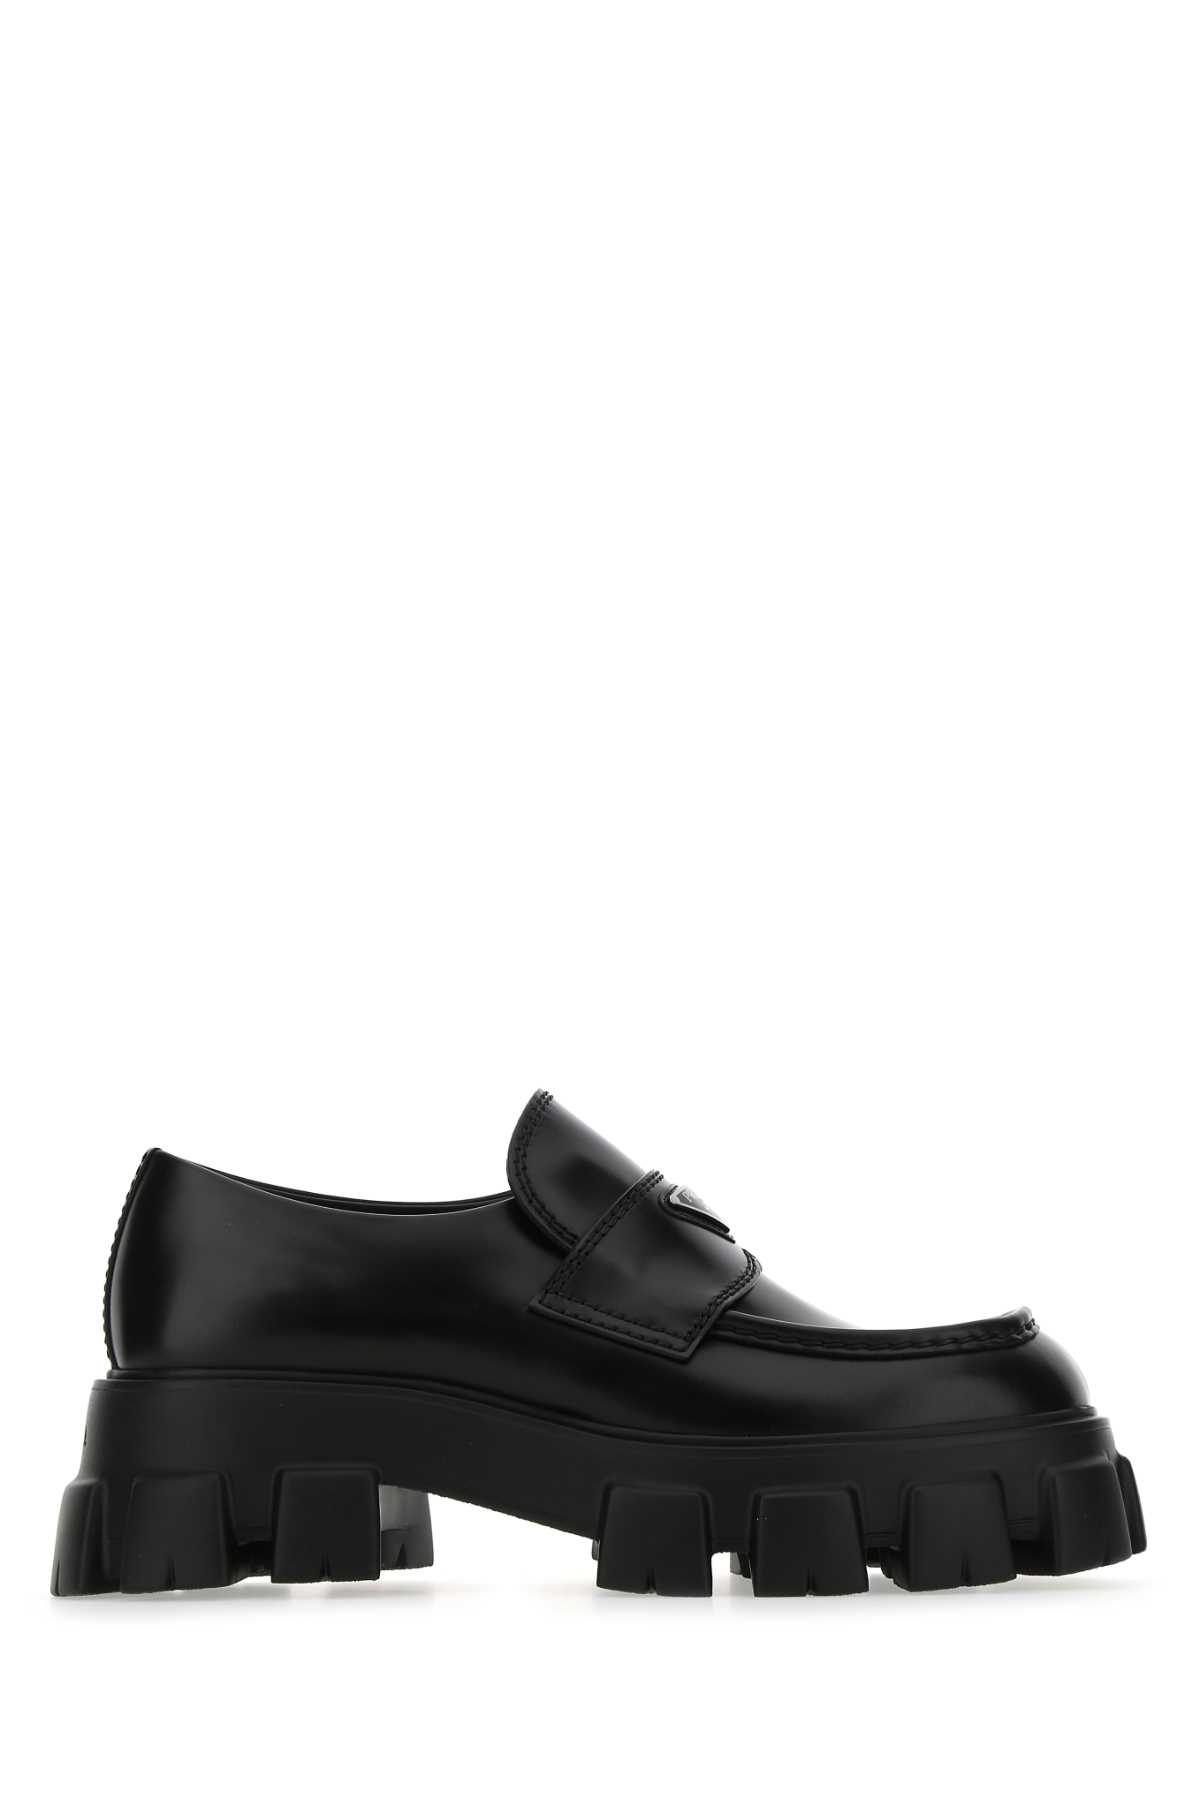 Shop Prada Black Leather Monolith Loafers In F0002